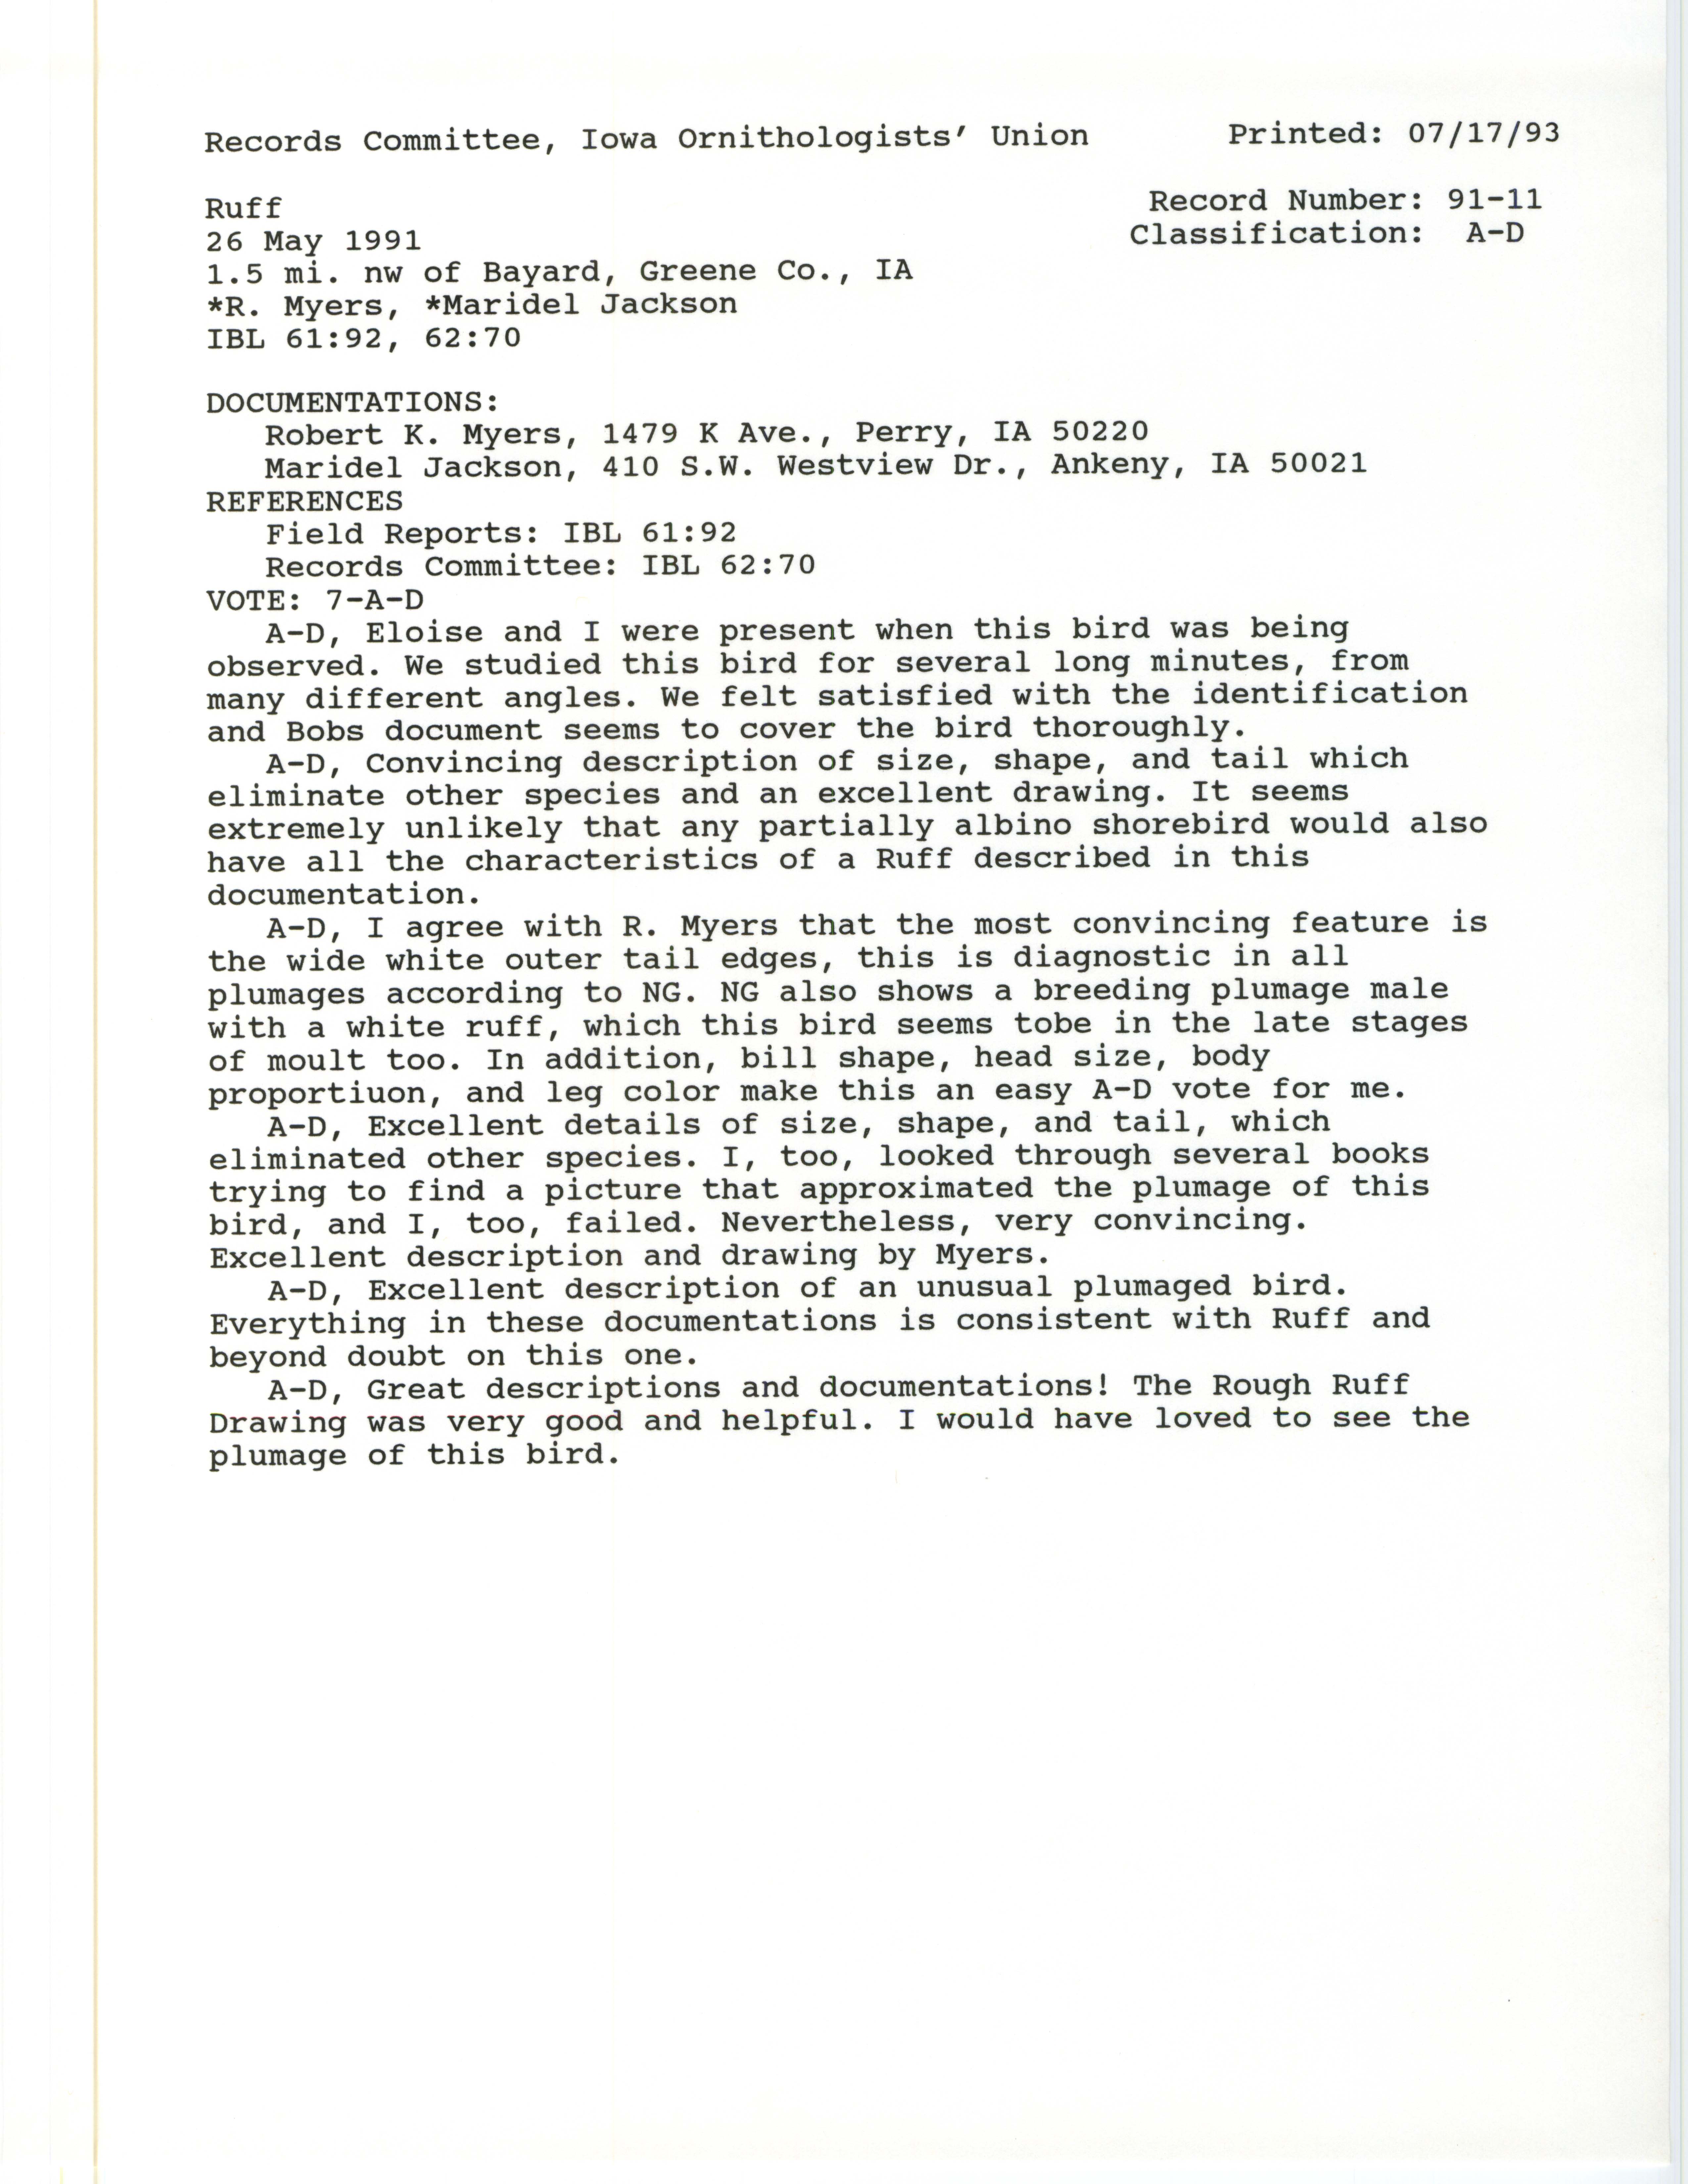 Records Committee review for rare bird sighting of Ruff northwest of Bayard, 1991